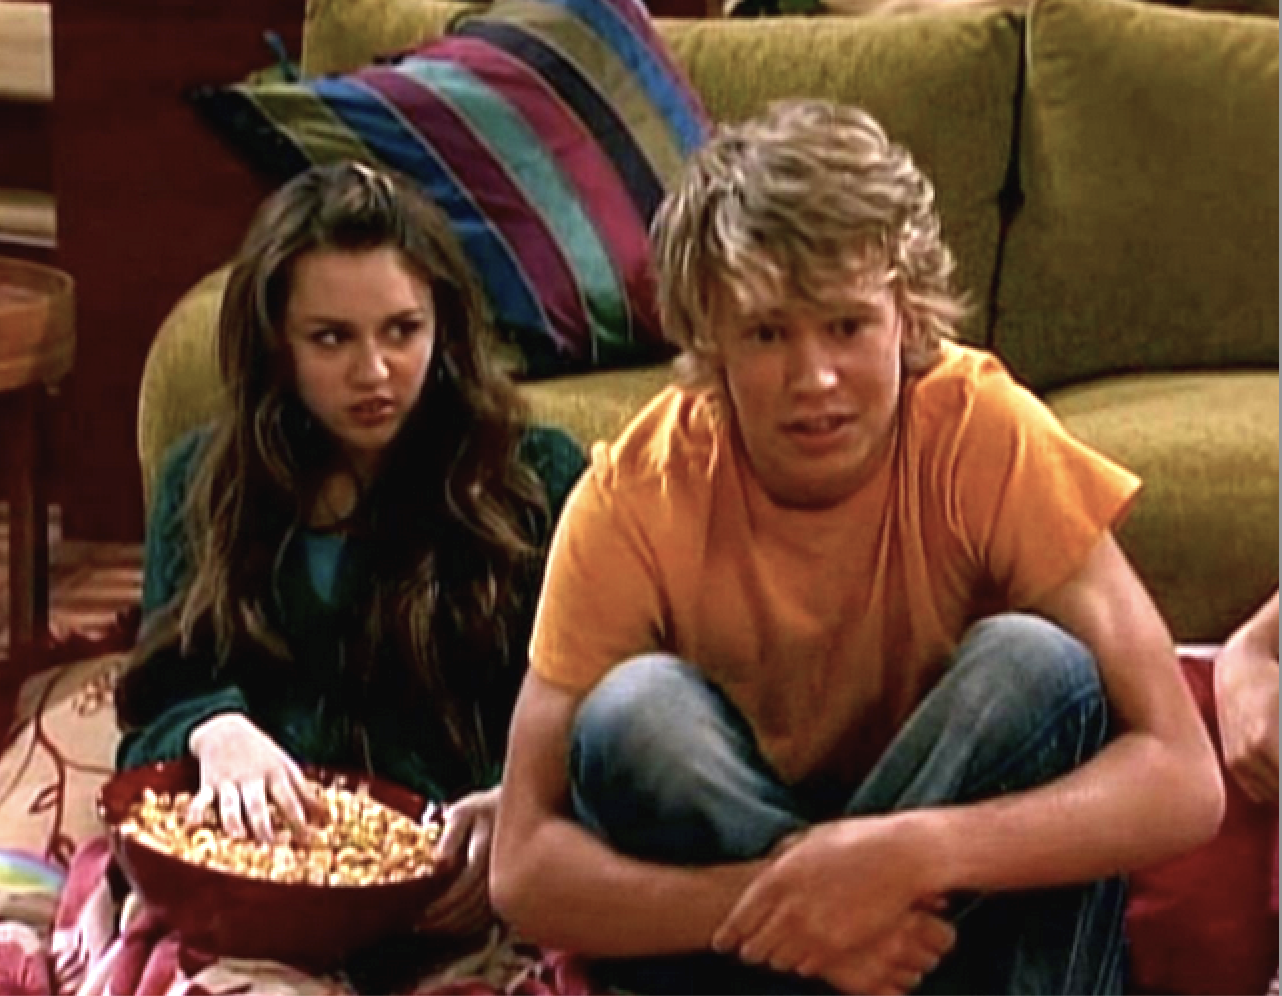 Miley Cyrus and Austin Butler sitting on the ground in front of a couch in a scene from the show. Miley is holding a bowl of popcorn